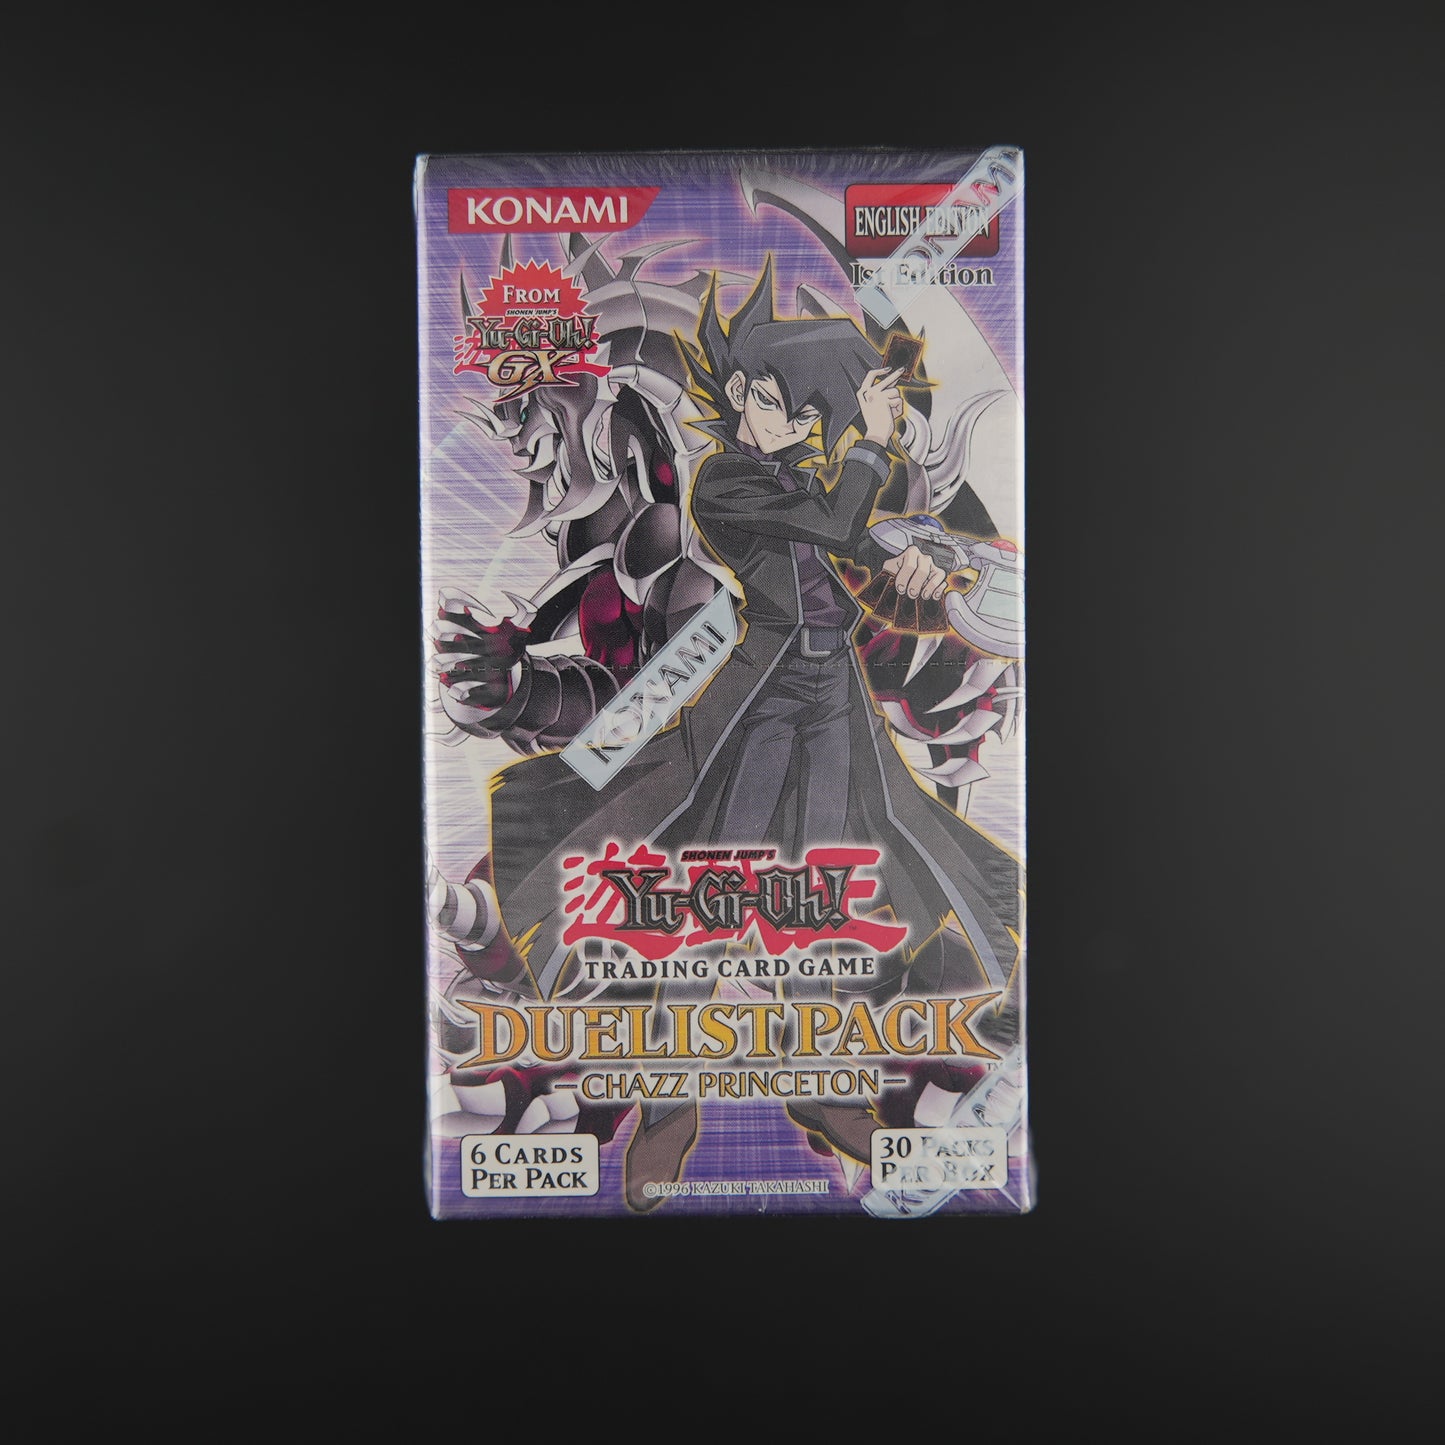 Duelist Pack: Chazz Princeton 1st Edition Booster Box